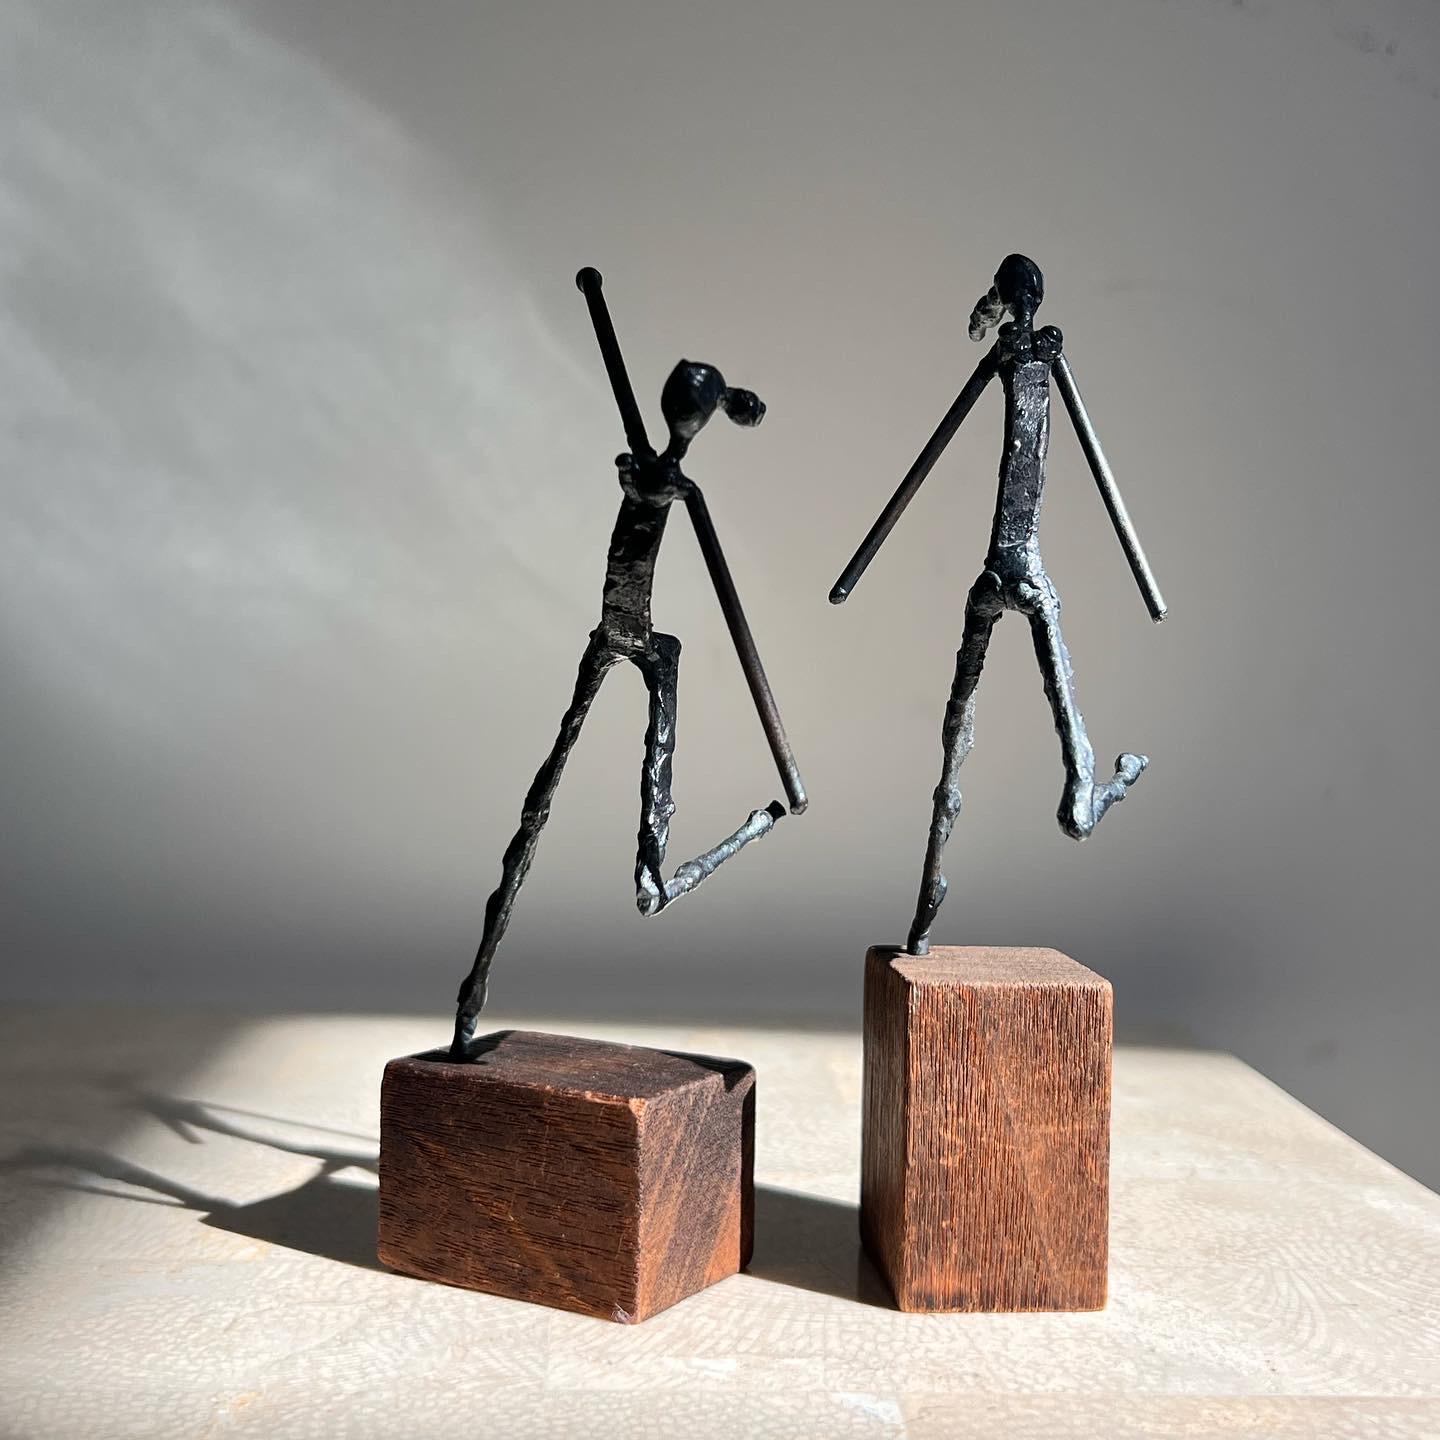 A pair of brutalist figurative sculptures by Arturo Bassols, signed by artist, 1968. Welded hand-worked metal and walnut wood, and each displaying a femme figure in mid-movement. Bassols (1932-2001) was a Cuban American artist who worked primarily